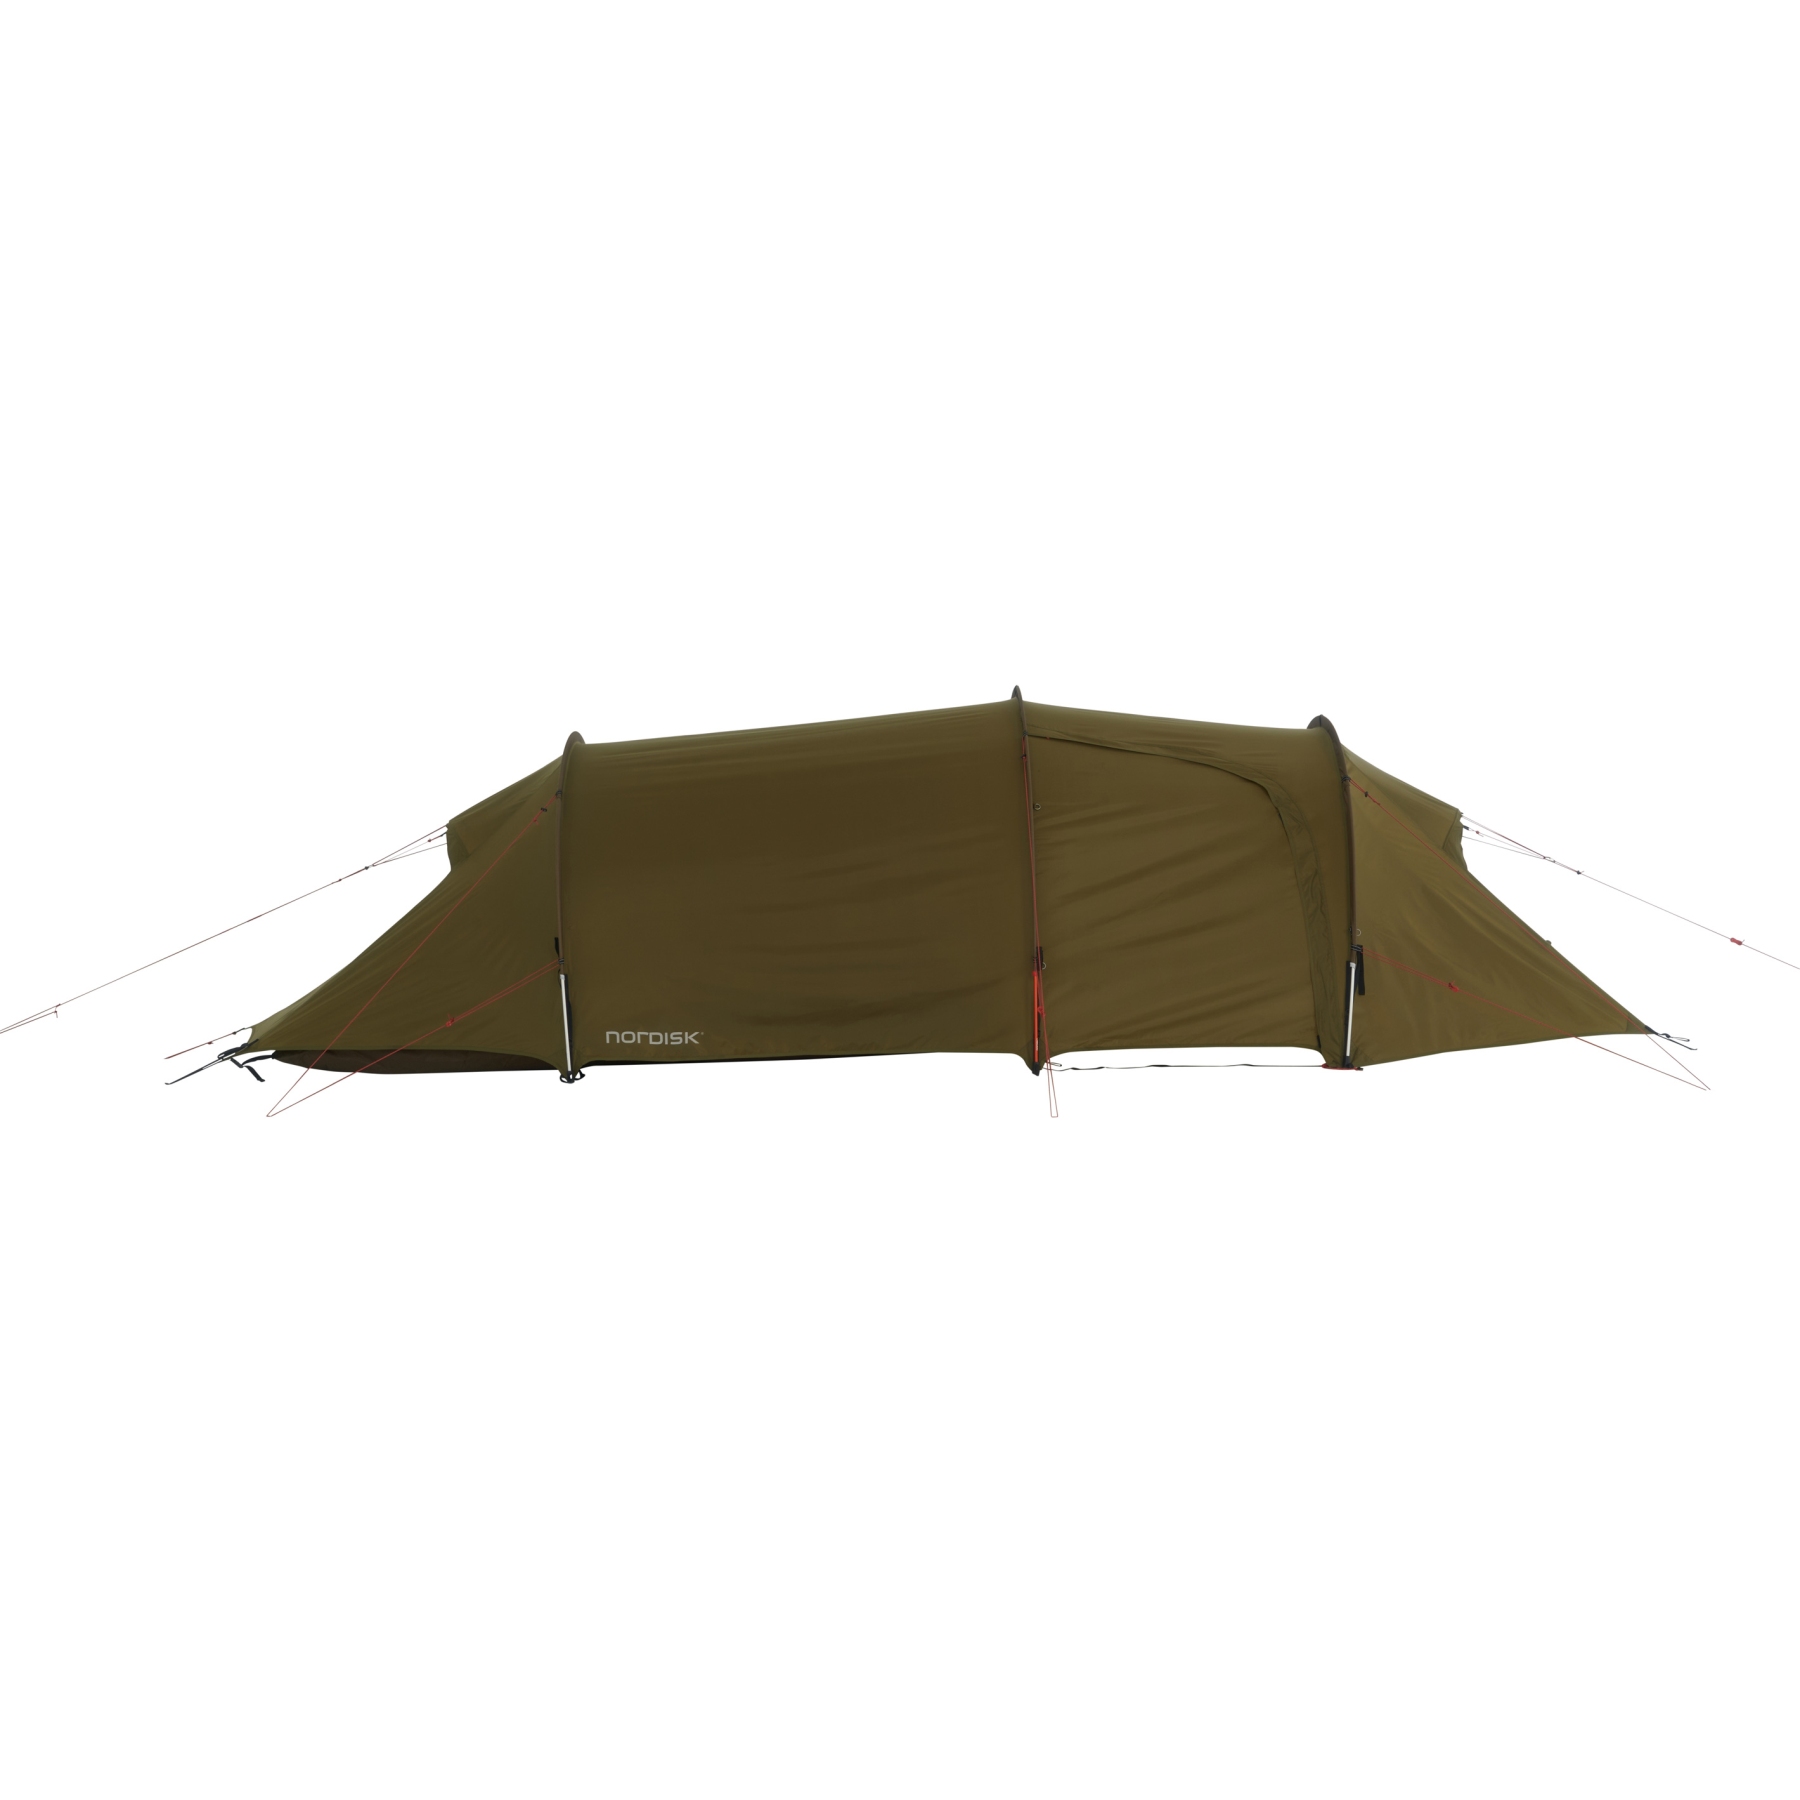 Picture of Nordisk Oppland 2 (2.0) PU Tent - Dark Olive